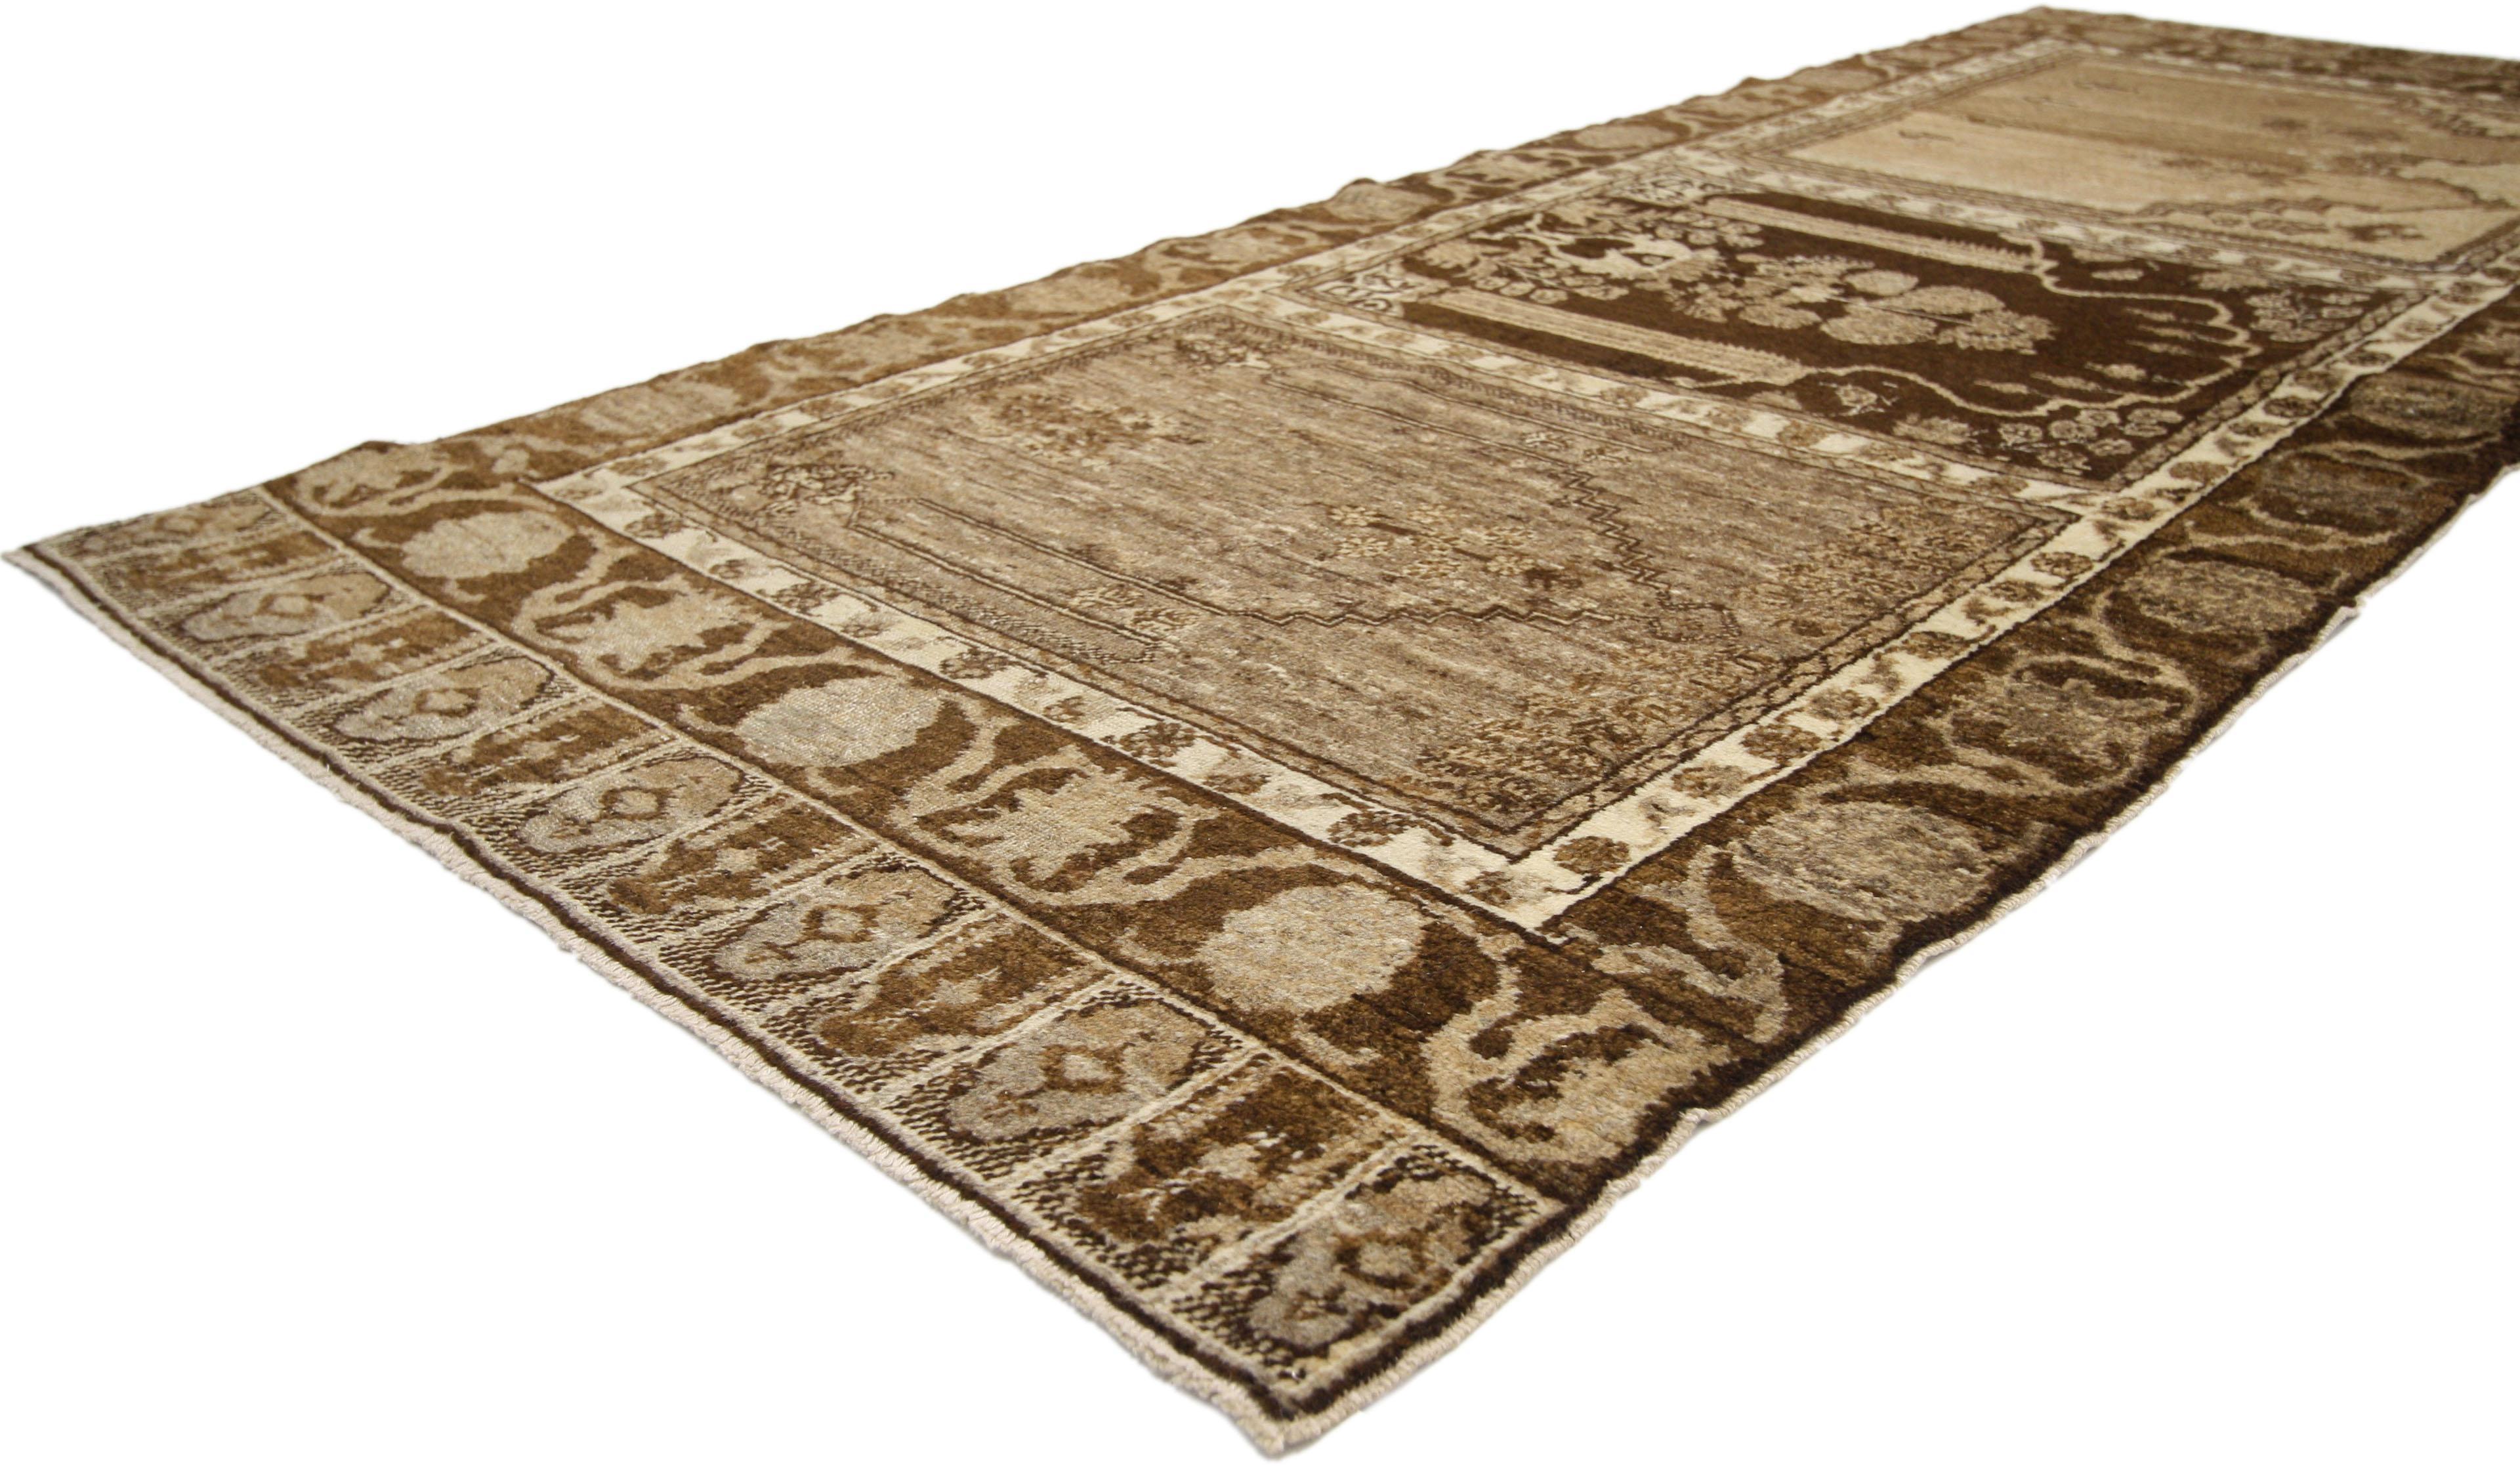 ​50193 Vintage Turkish Prayer Runner with Multiple Mihrabs Design and Mid-Century Modern Style, Anatolian Saph Runner 03'02 x 07'07. Warm earth-tone colors and Mid-Century Modern style collide in this hand knotted vintage Anatolian Saph runner. The